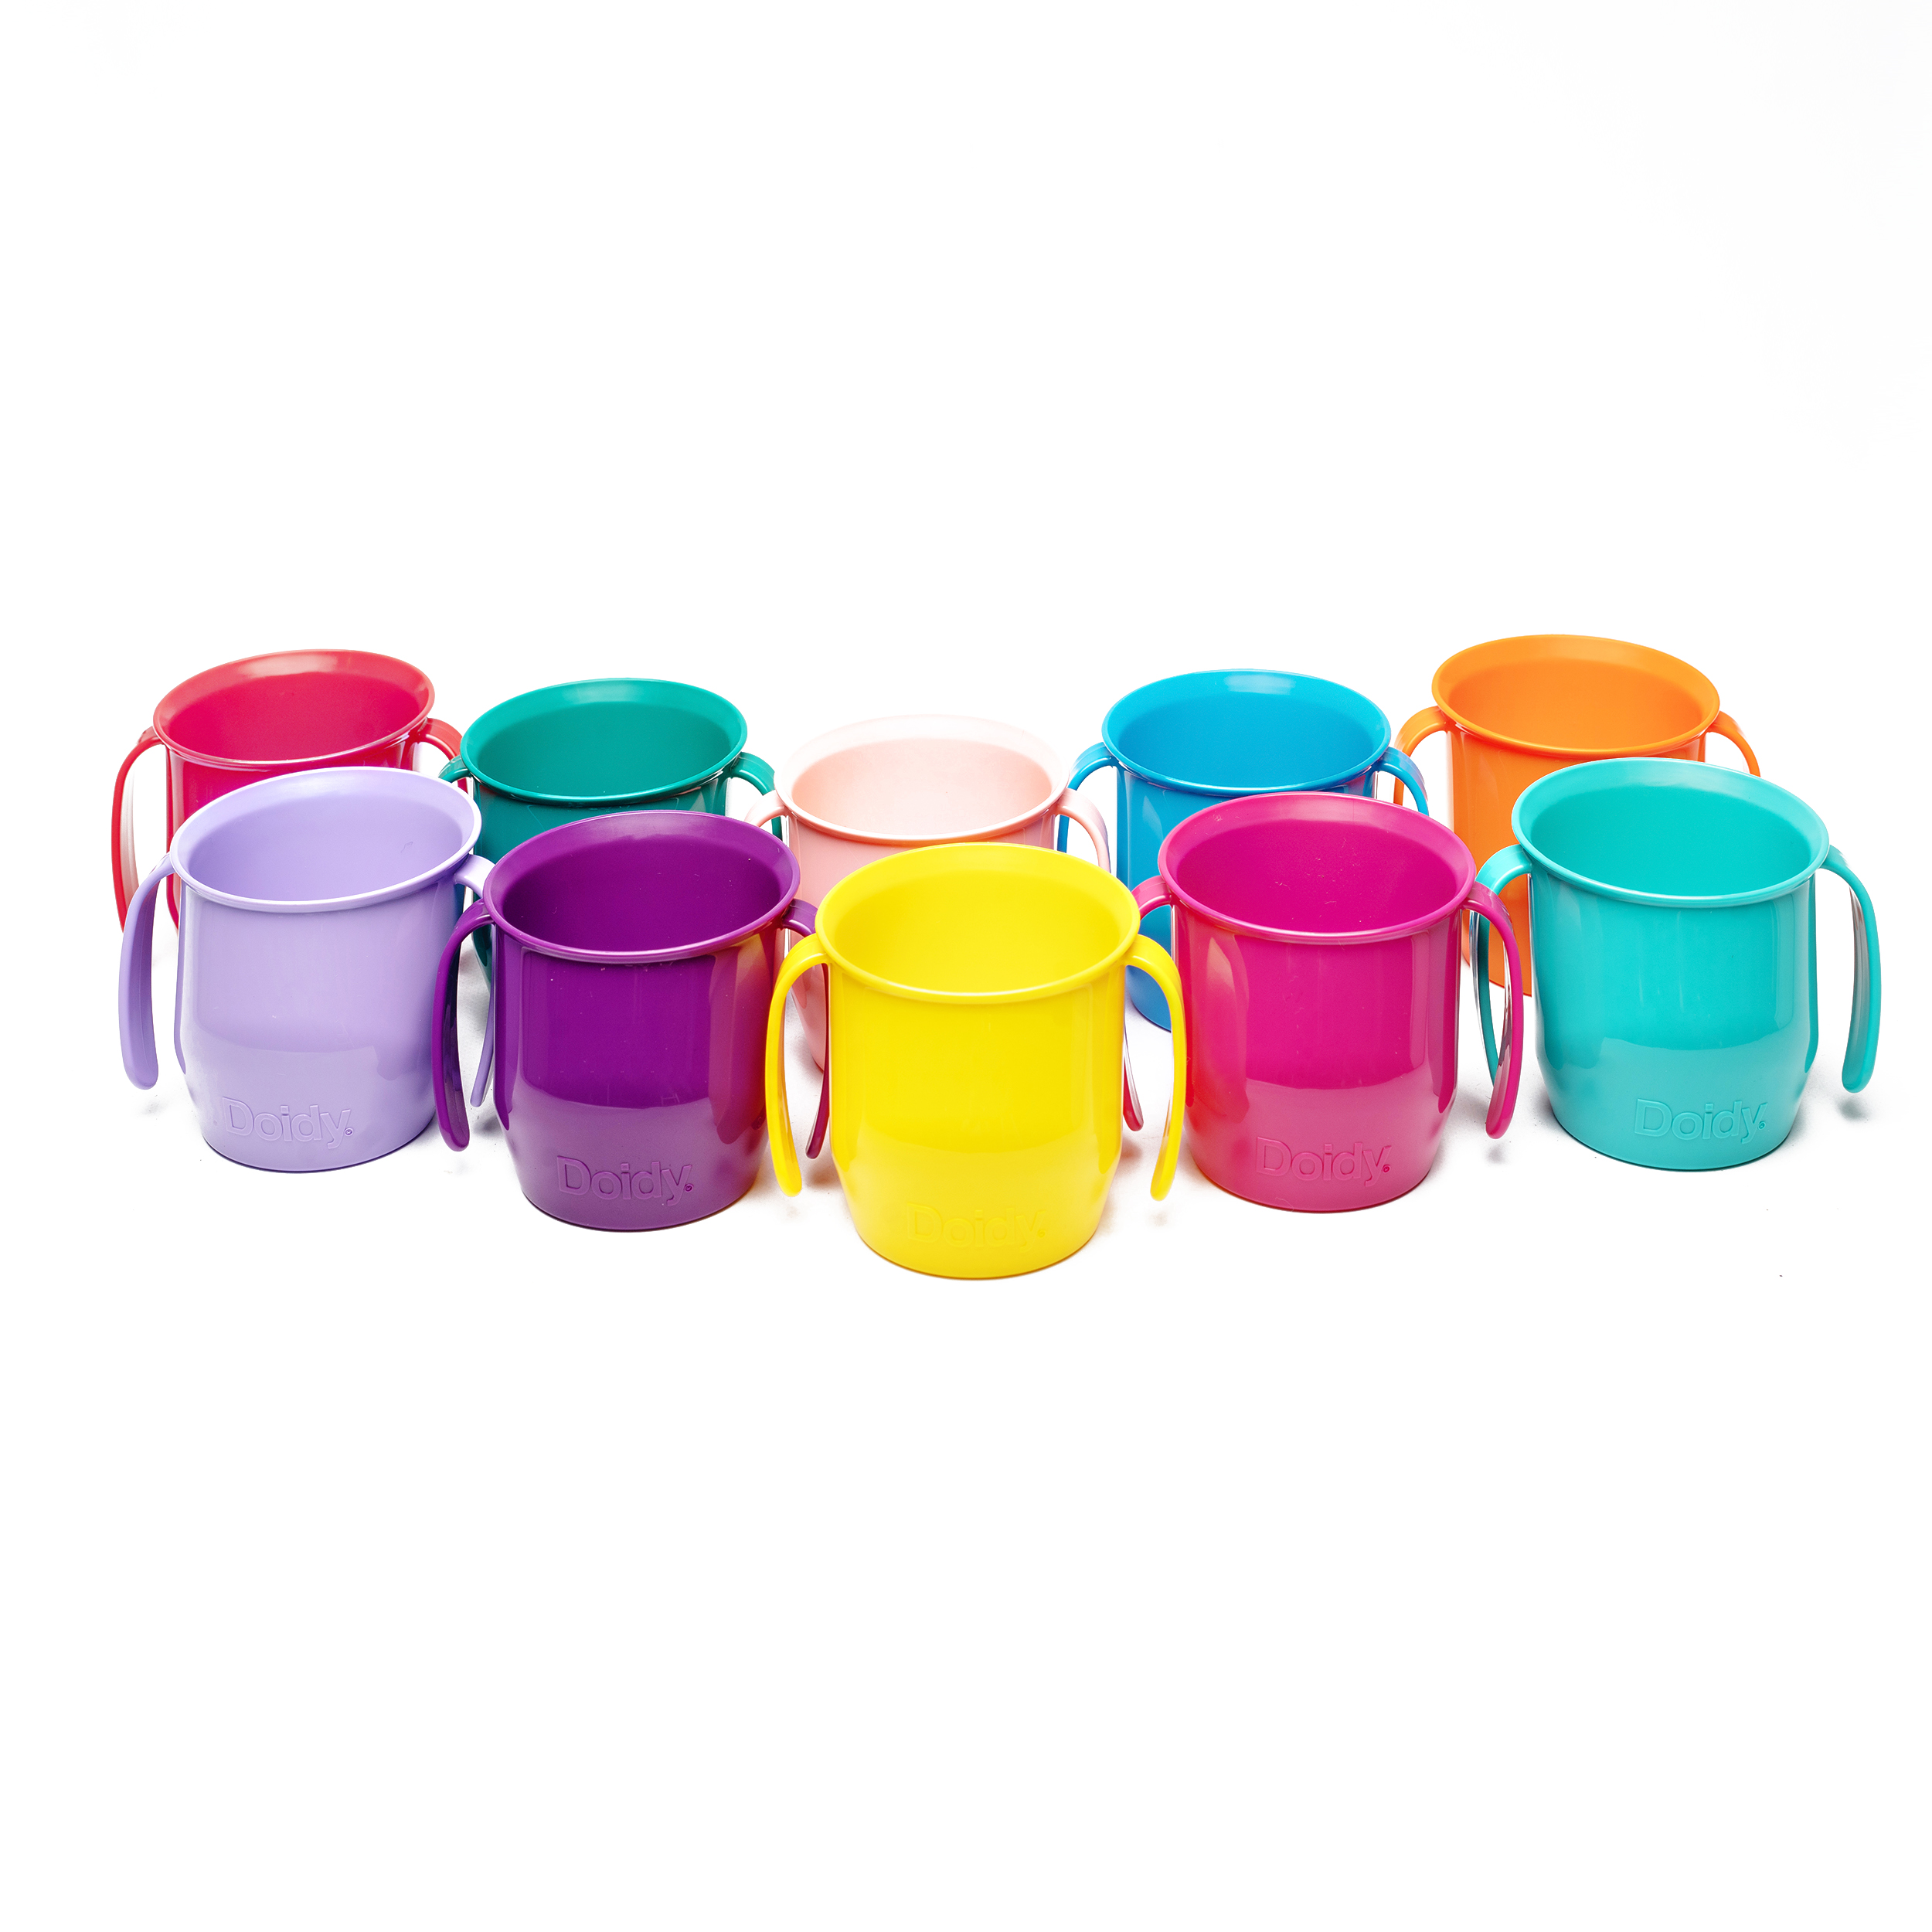 Doidy Cup Unique Slanted Design Training Sippy Cups for Toddlers & Babies 